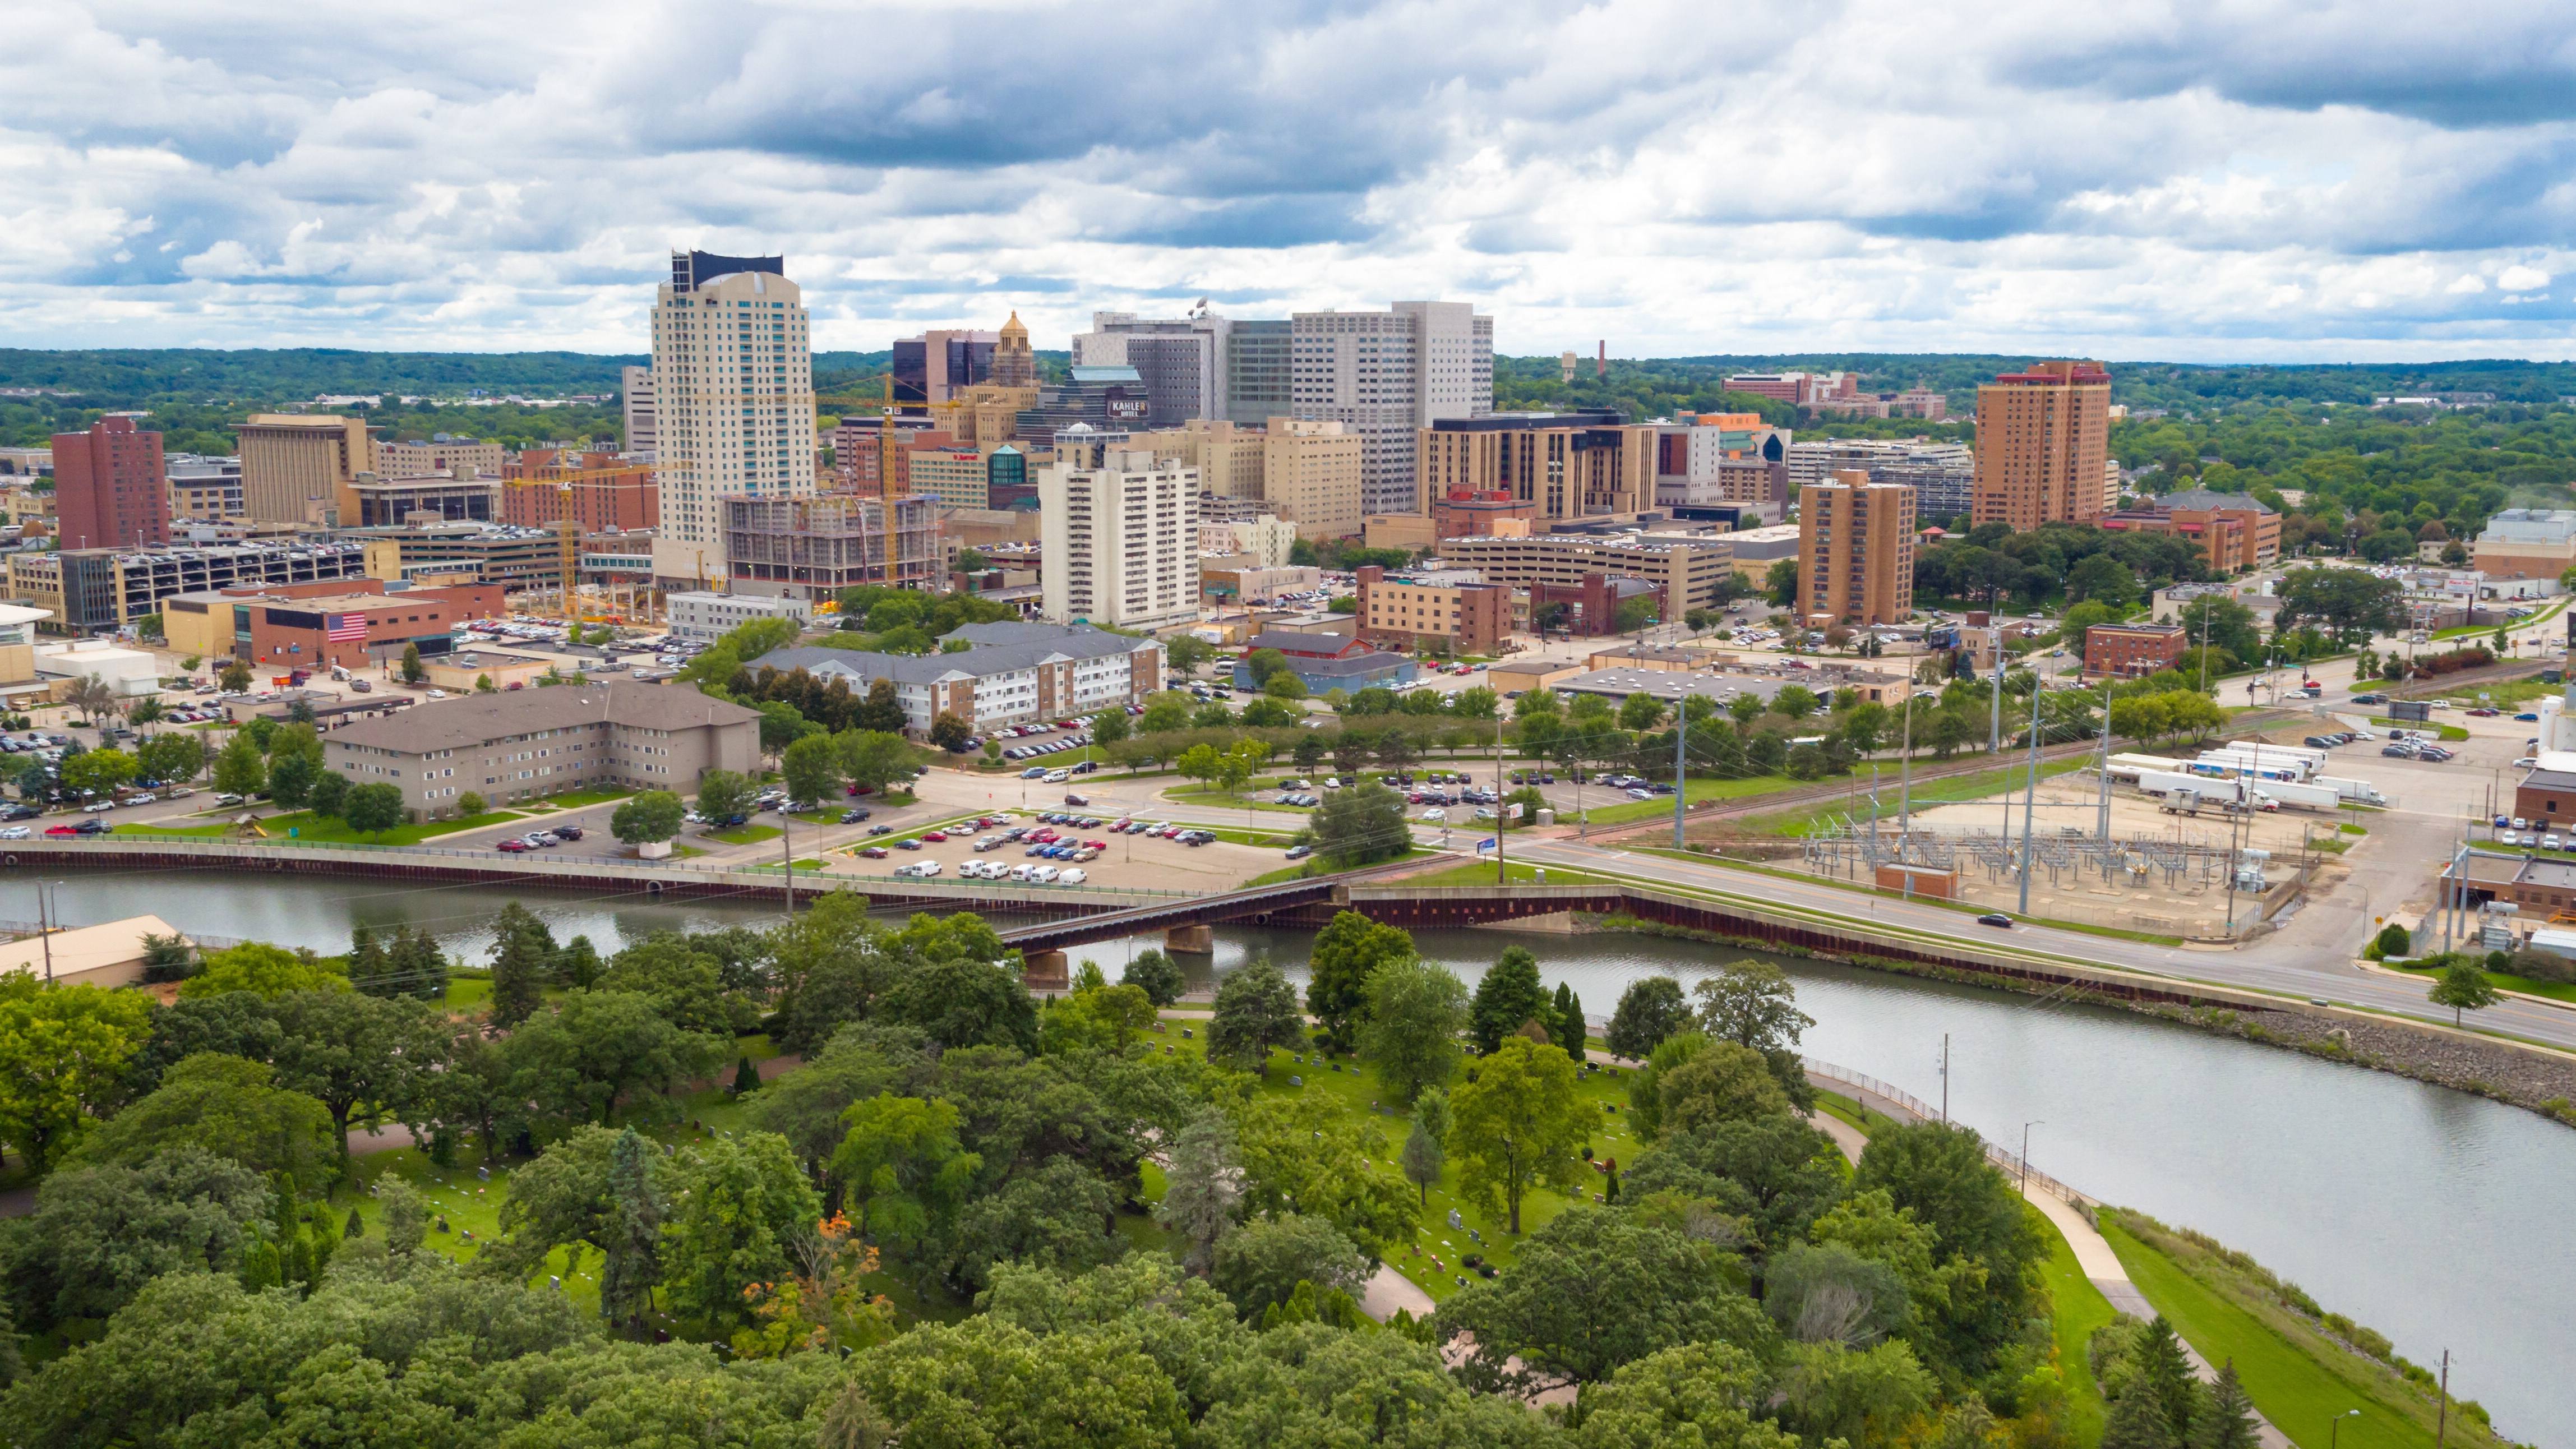 Google puts down roots in Rochester, Minnesota, to be closer to Mayo